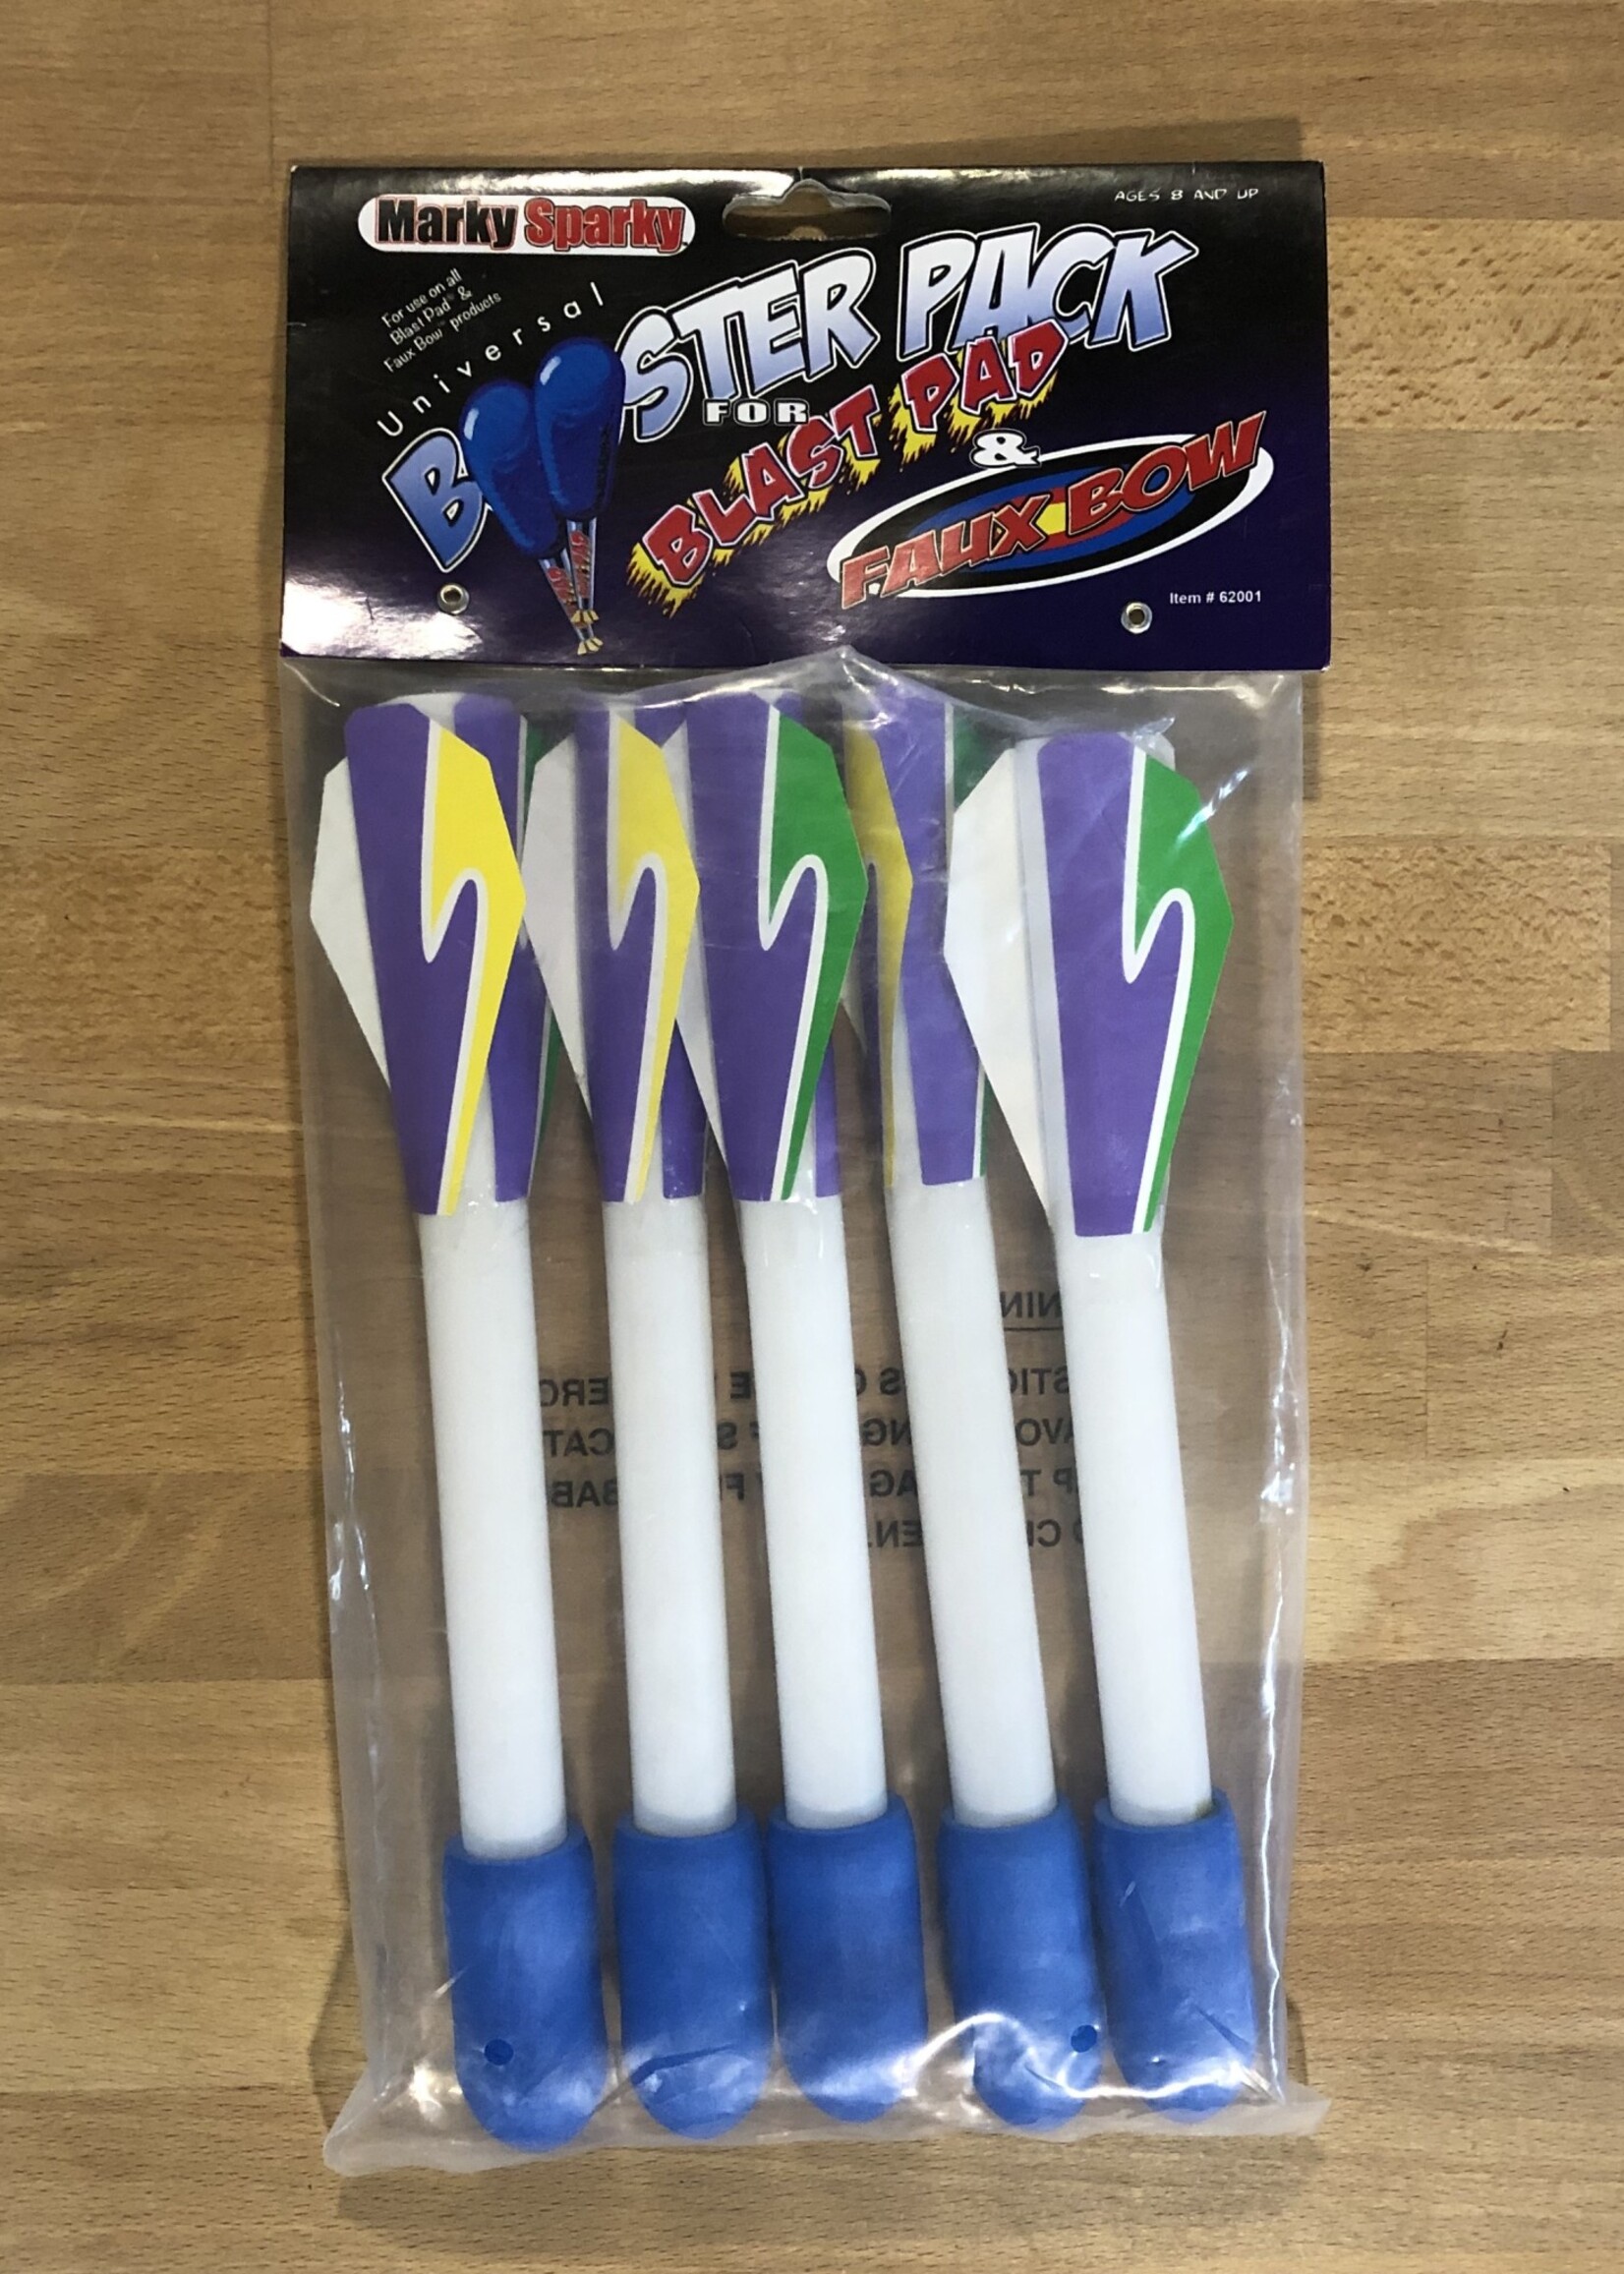 Universal Booster Pack Set of 5 Rockets